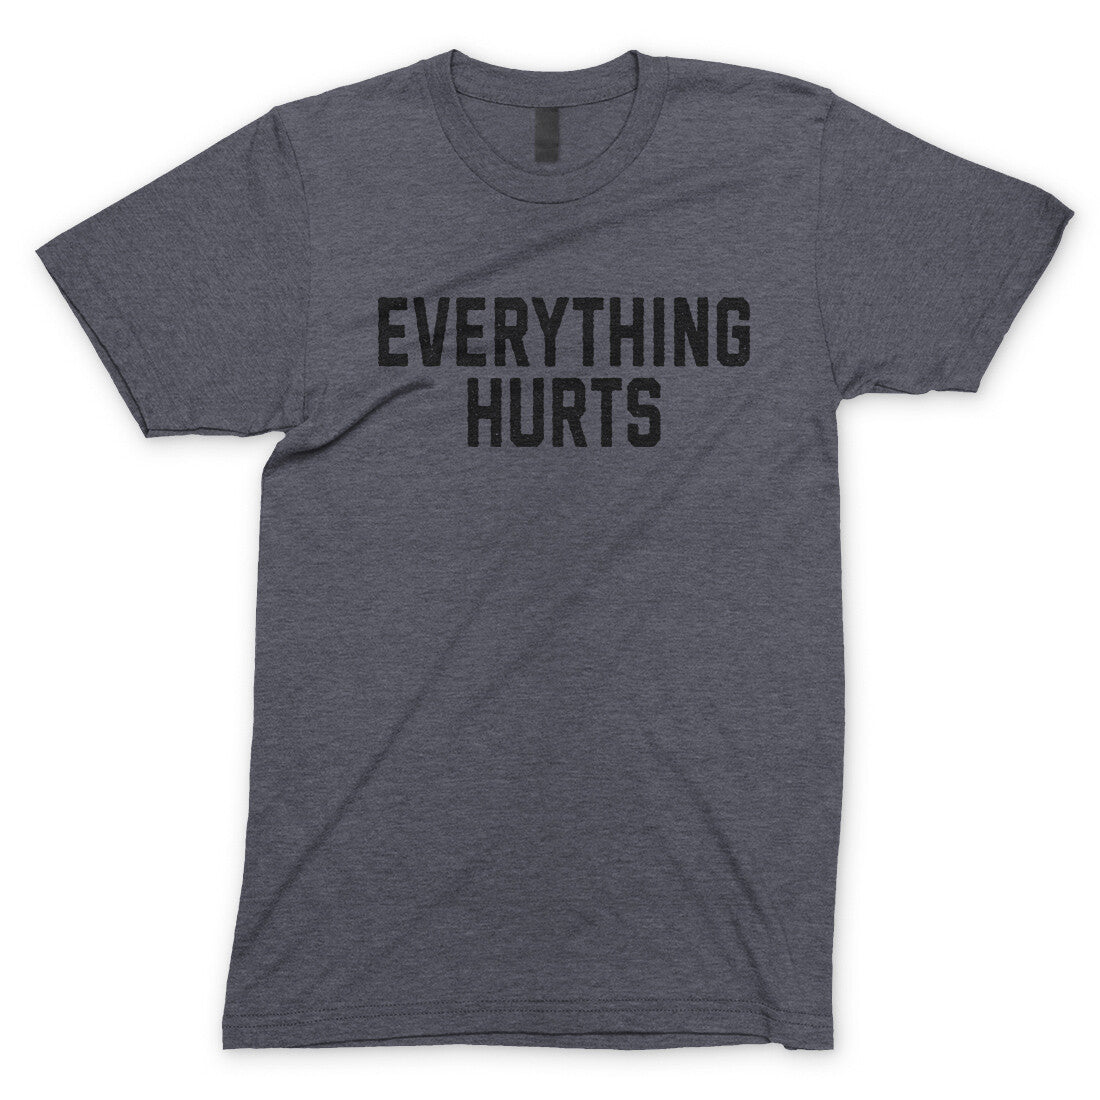 Everything Hurts in Dark Heather Color